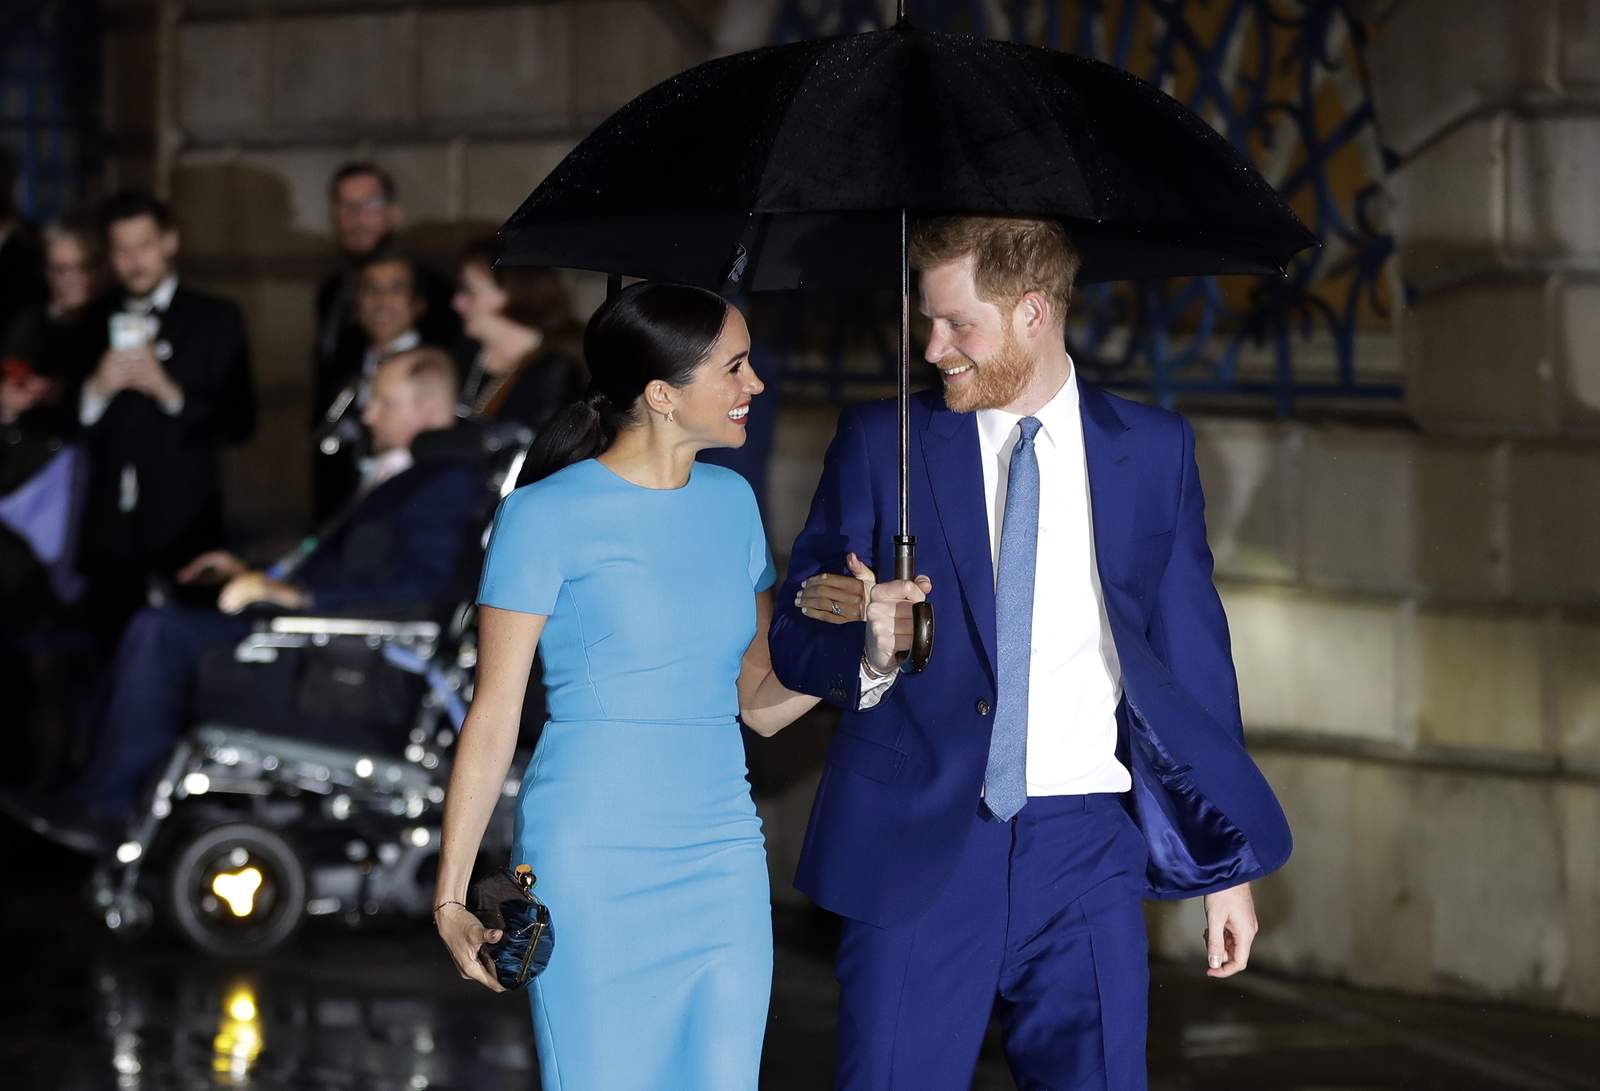 It’s final: Harry and Meghan won’t return as working royals